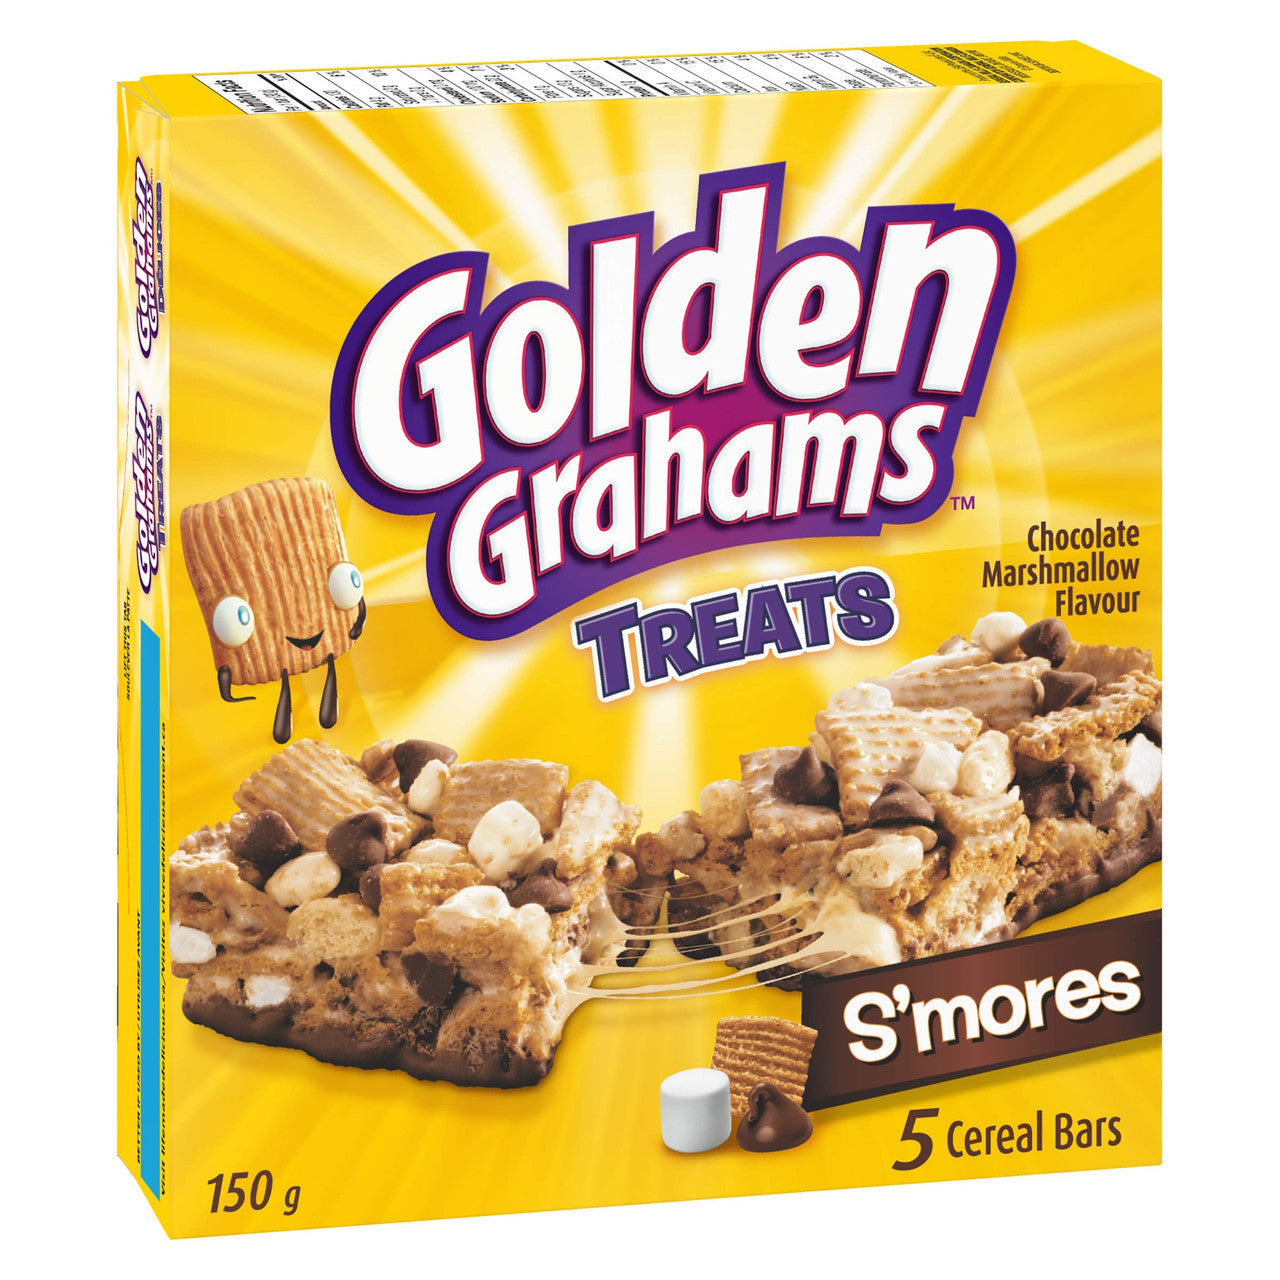 Golden Grahams Chocolate Marshmallow S'mores Cereal Bars, 5ct, 150g, {Imported from Canada}